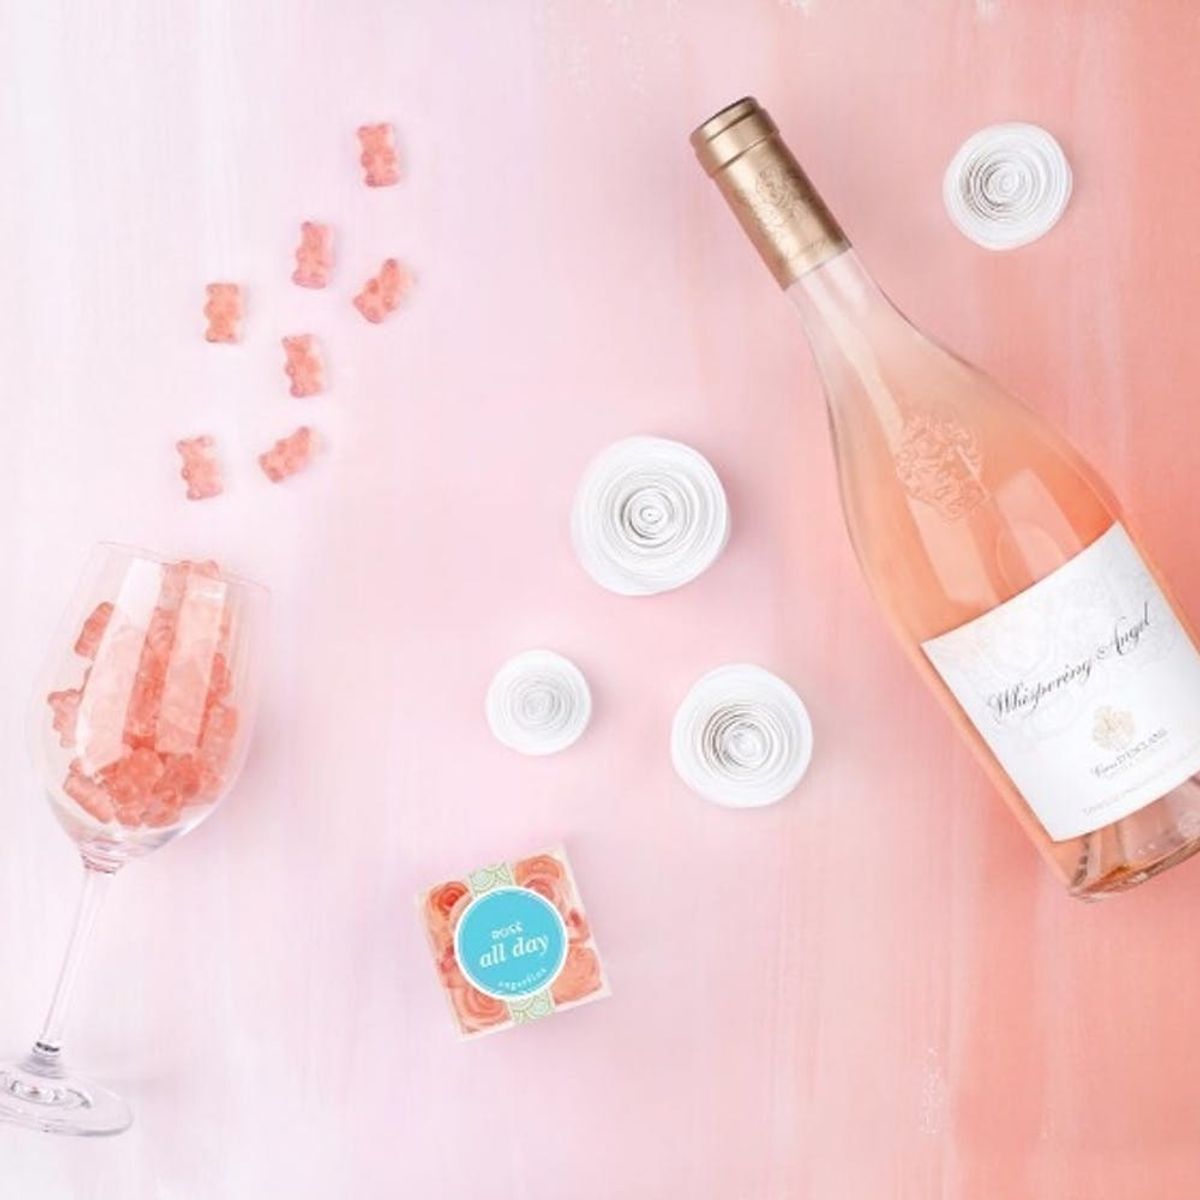 There’s a 400-Person Wait List for These Rosé-Flavored Gummy Bears